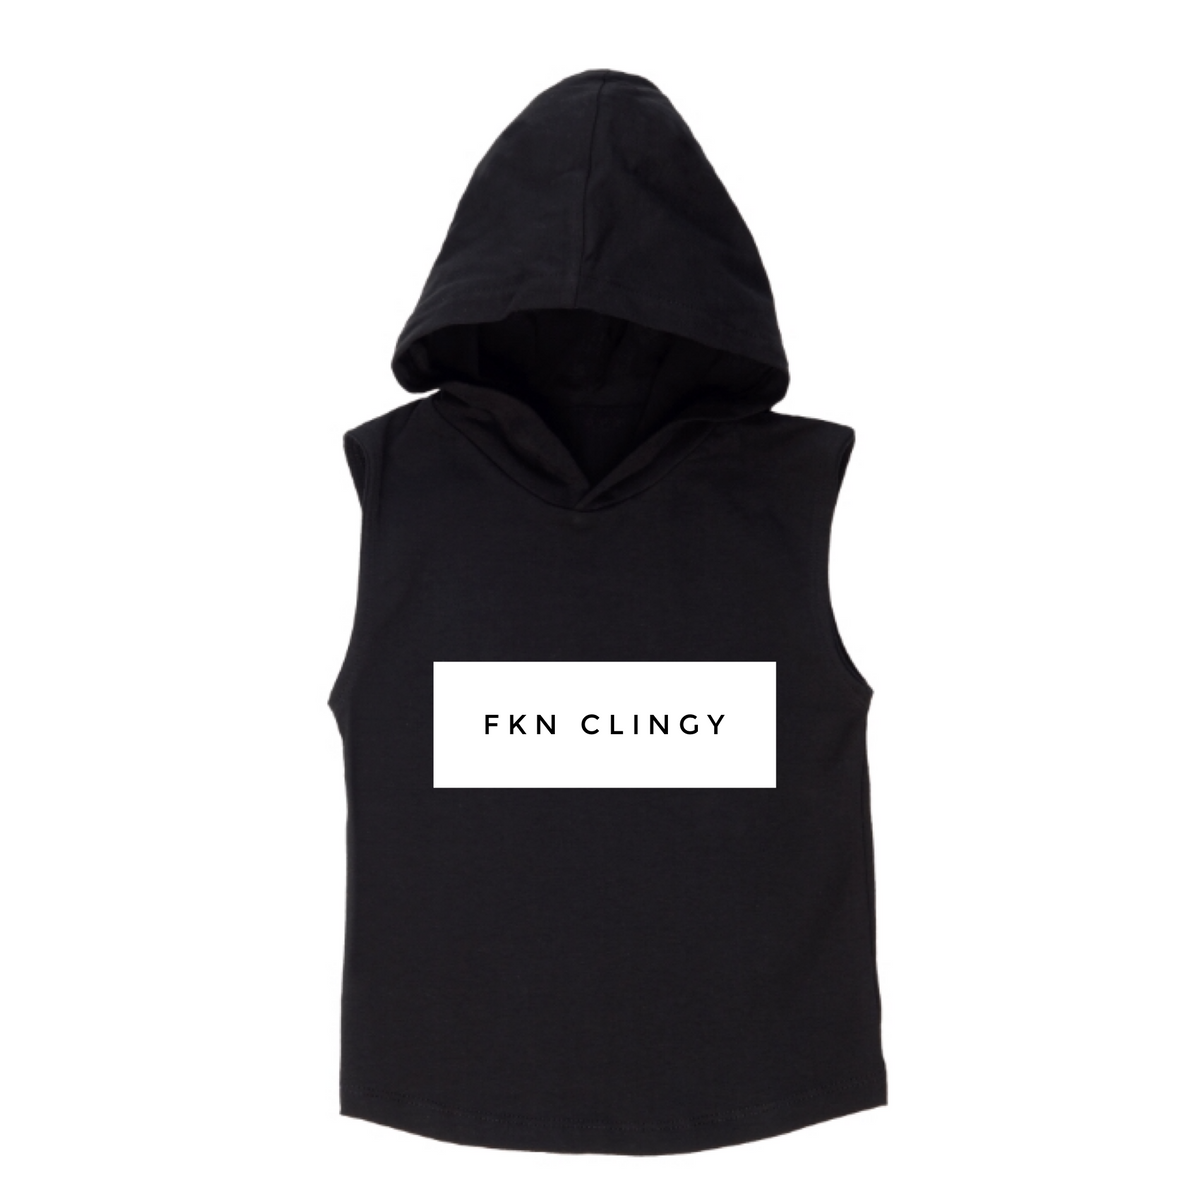 MLW By Design - FKN CLINGY™ Sleeveless Hoodie | Black or White